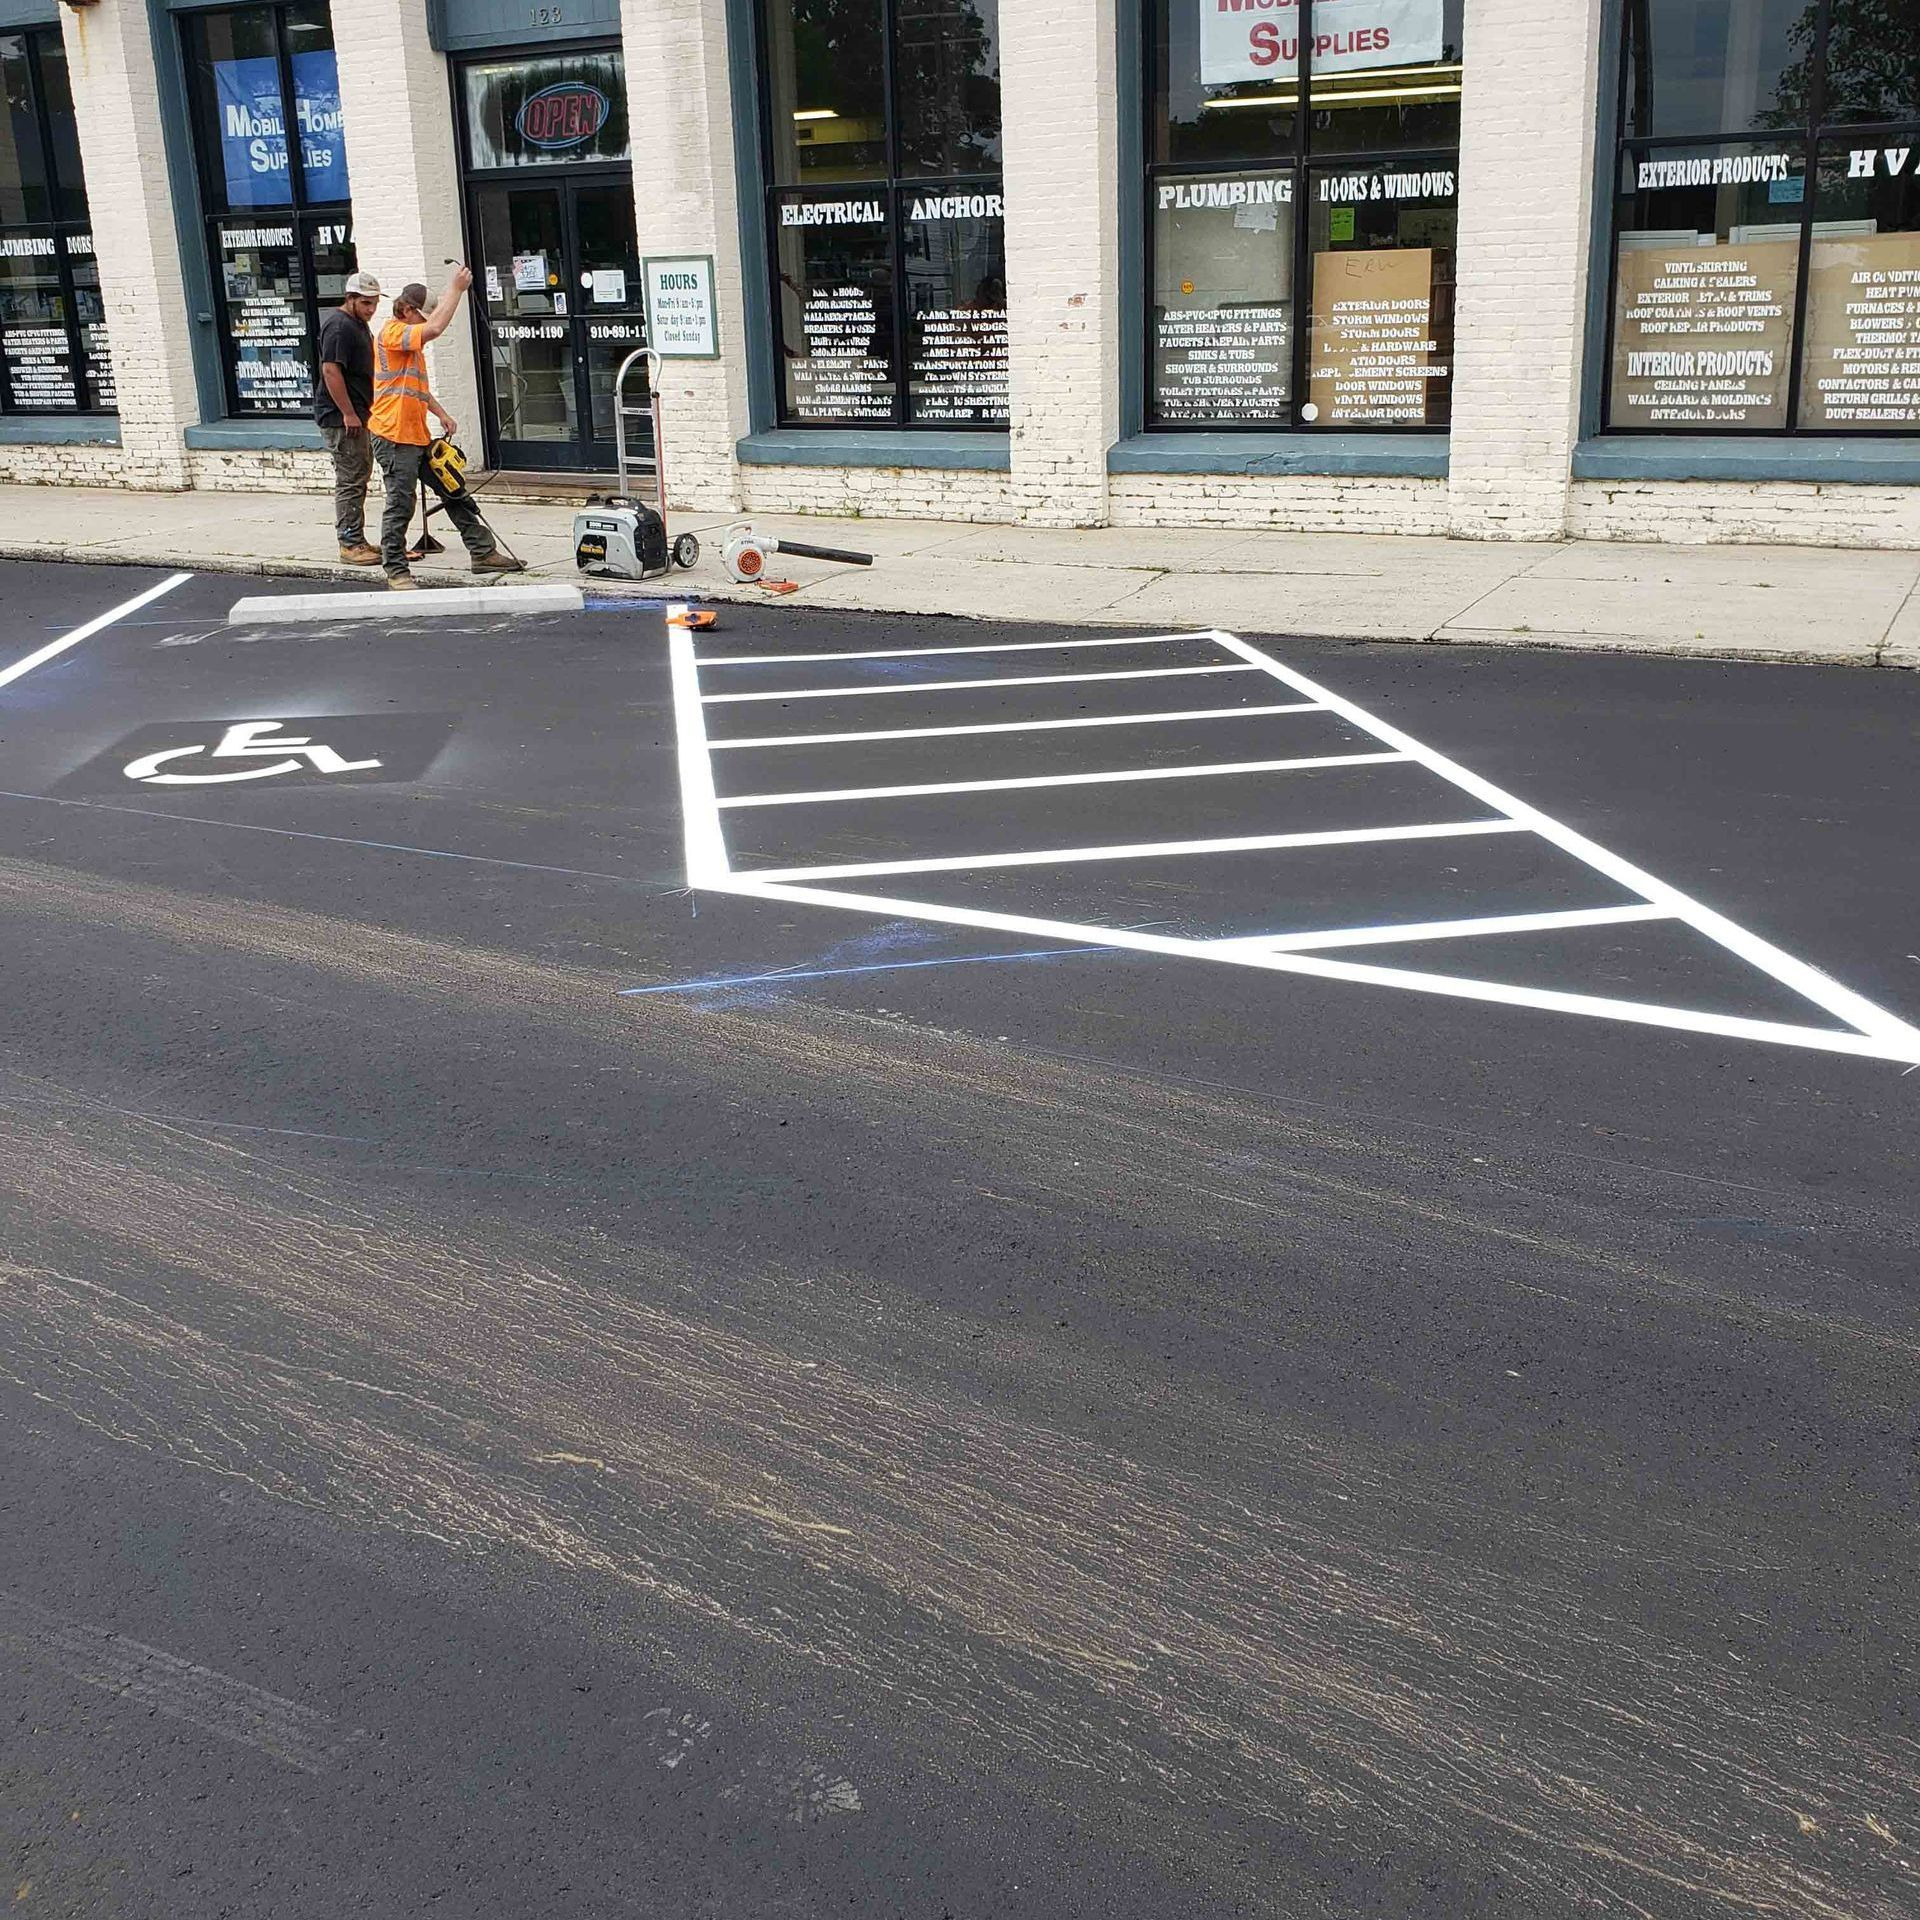 Two men are painting a handicapped parking space in front of a store